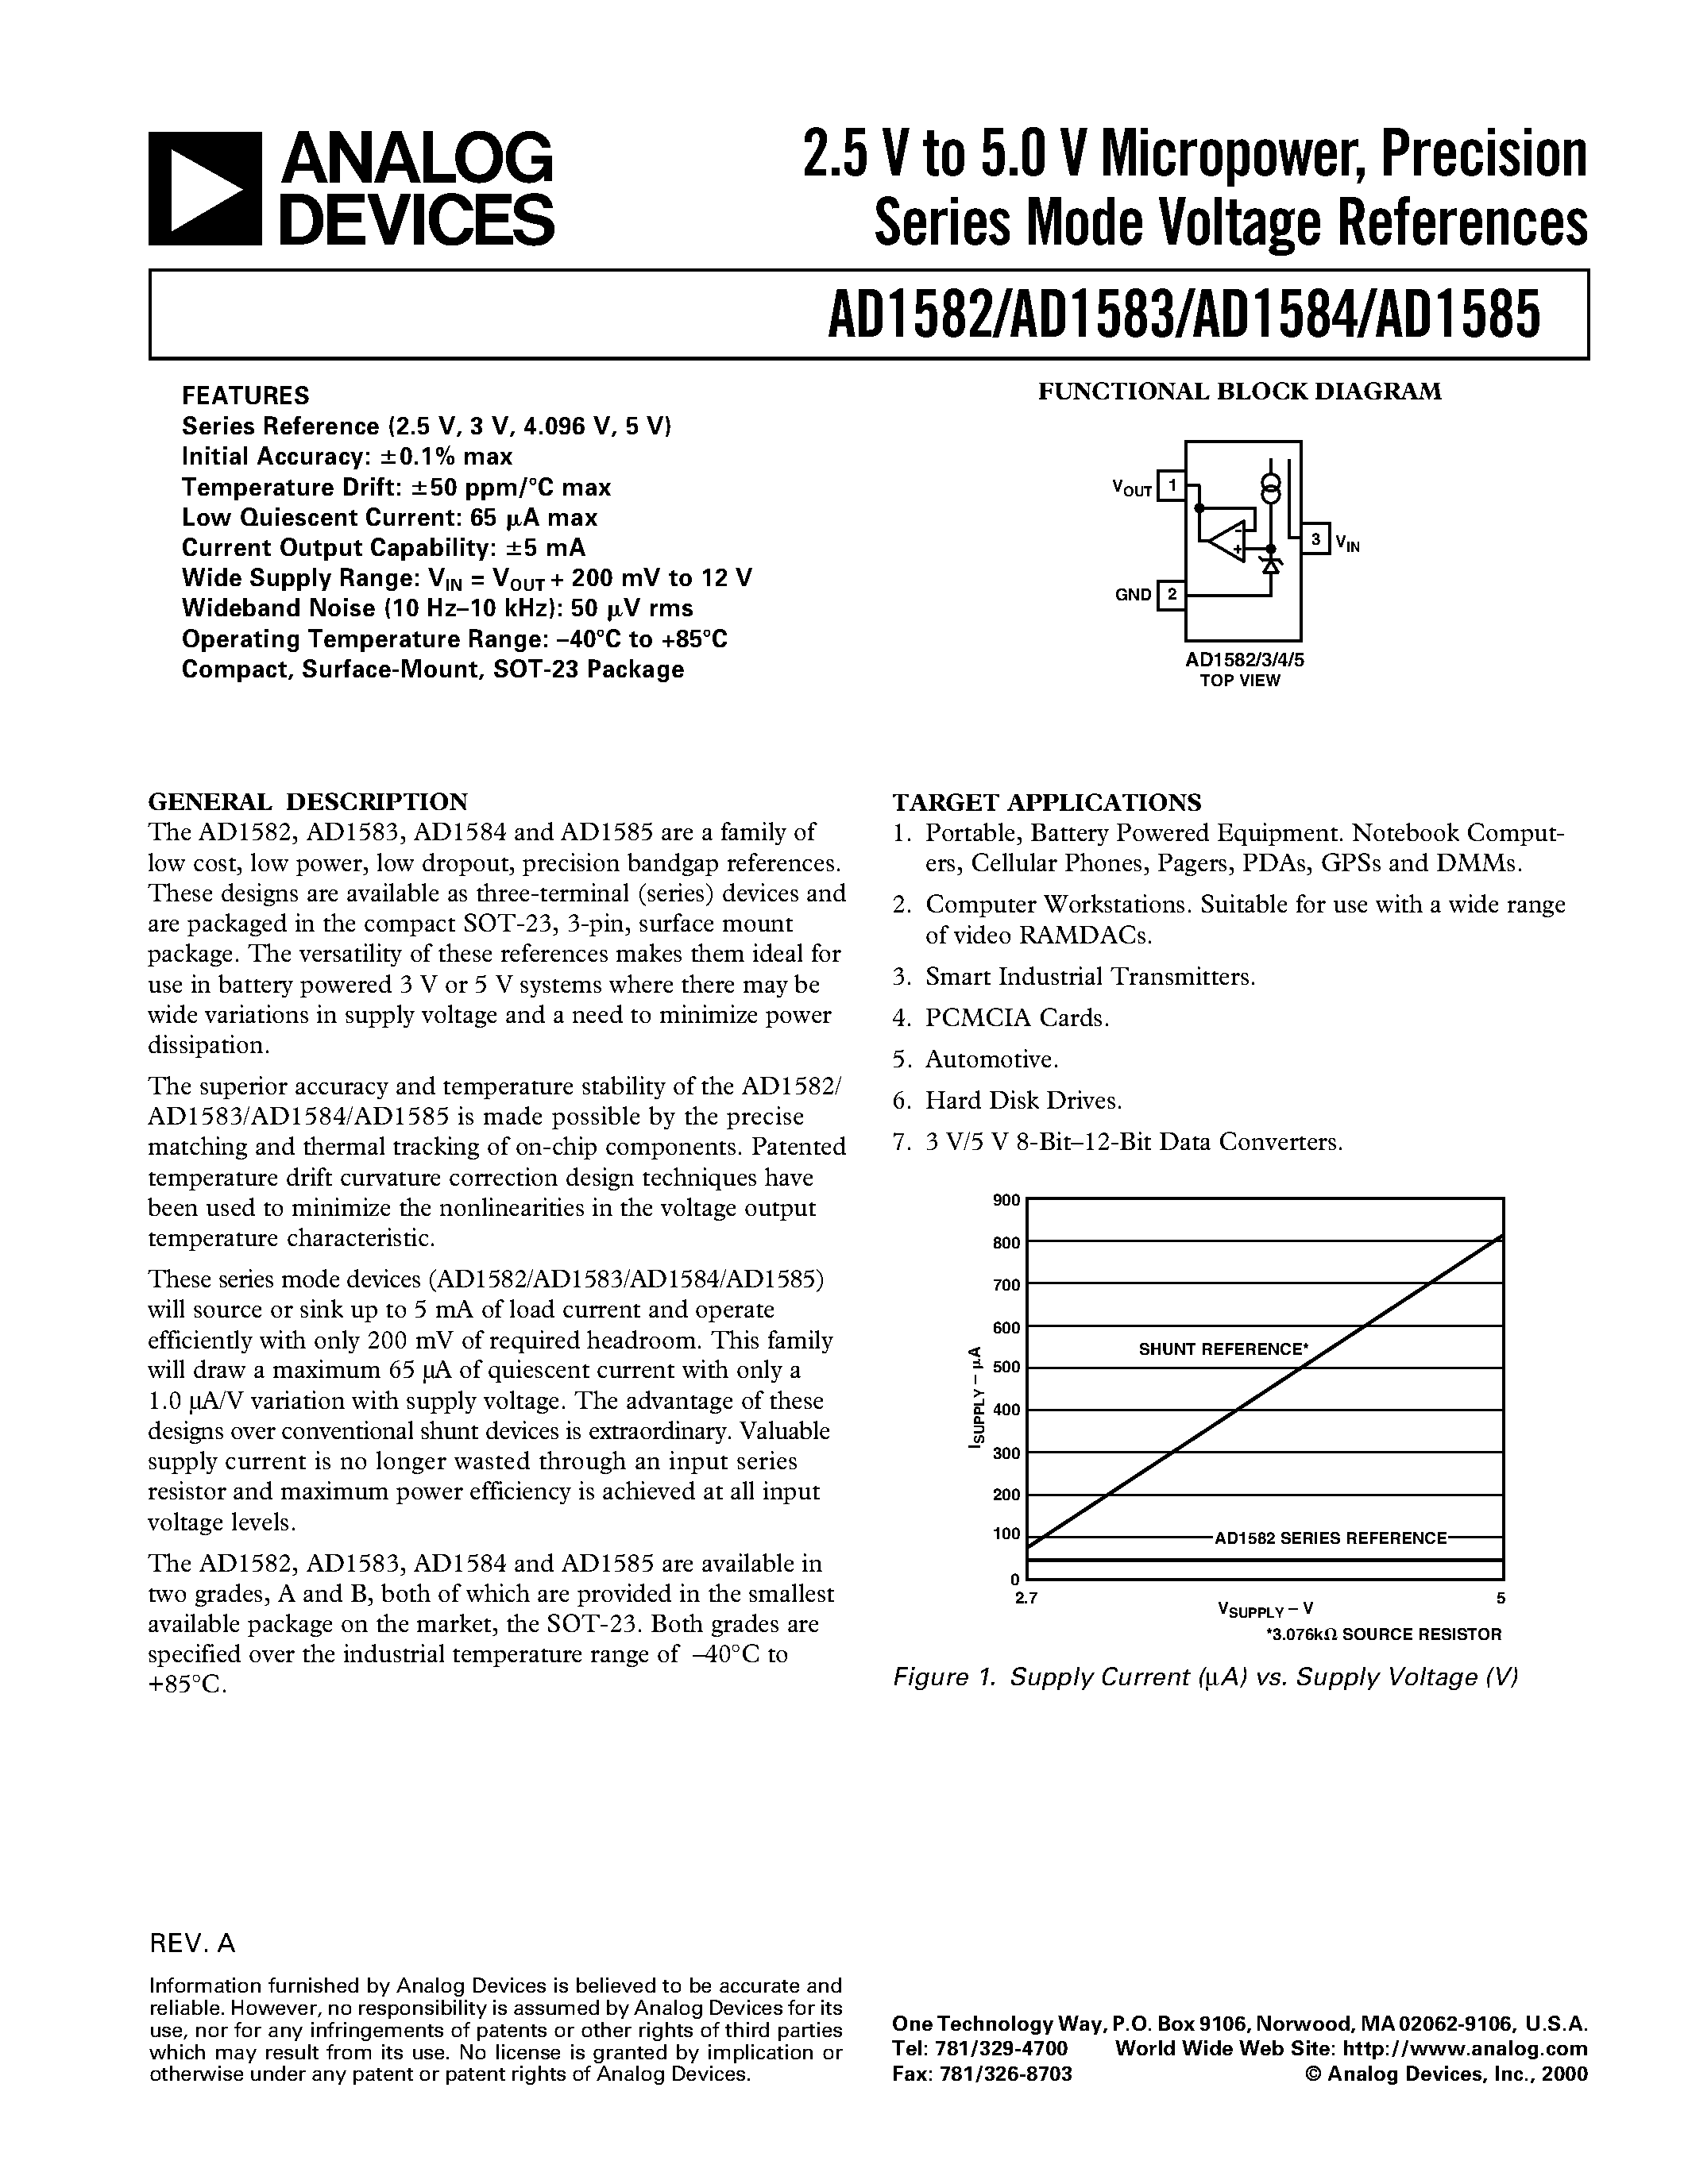 Datasheet AD1585BRTRL - 2.5 V to 5.0 V Micropower/ Precision Series Mode Voltage References page 1